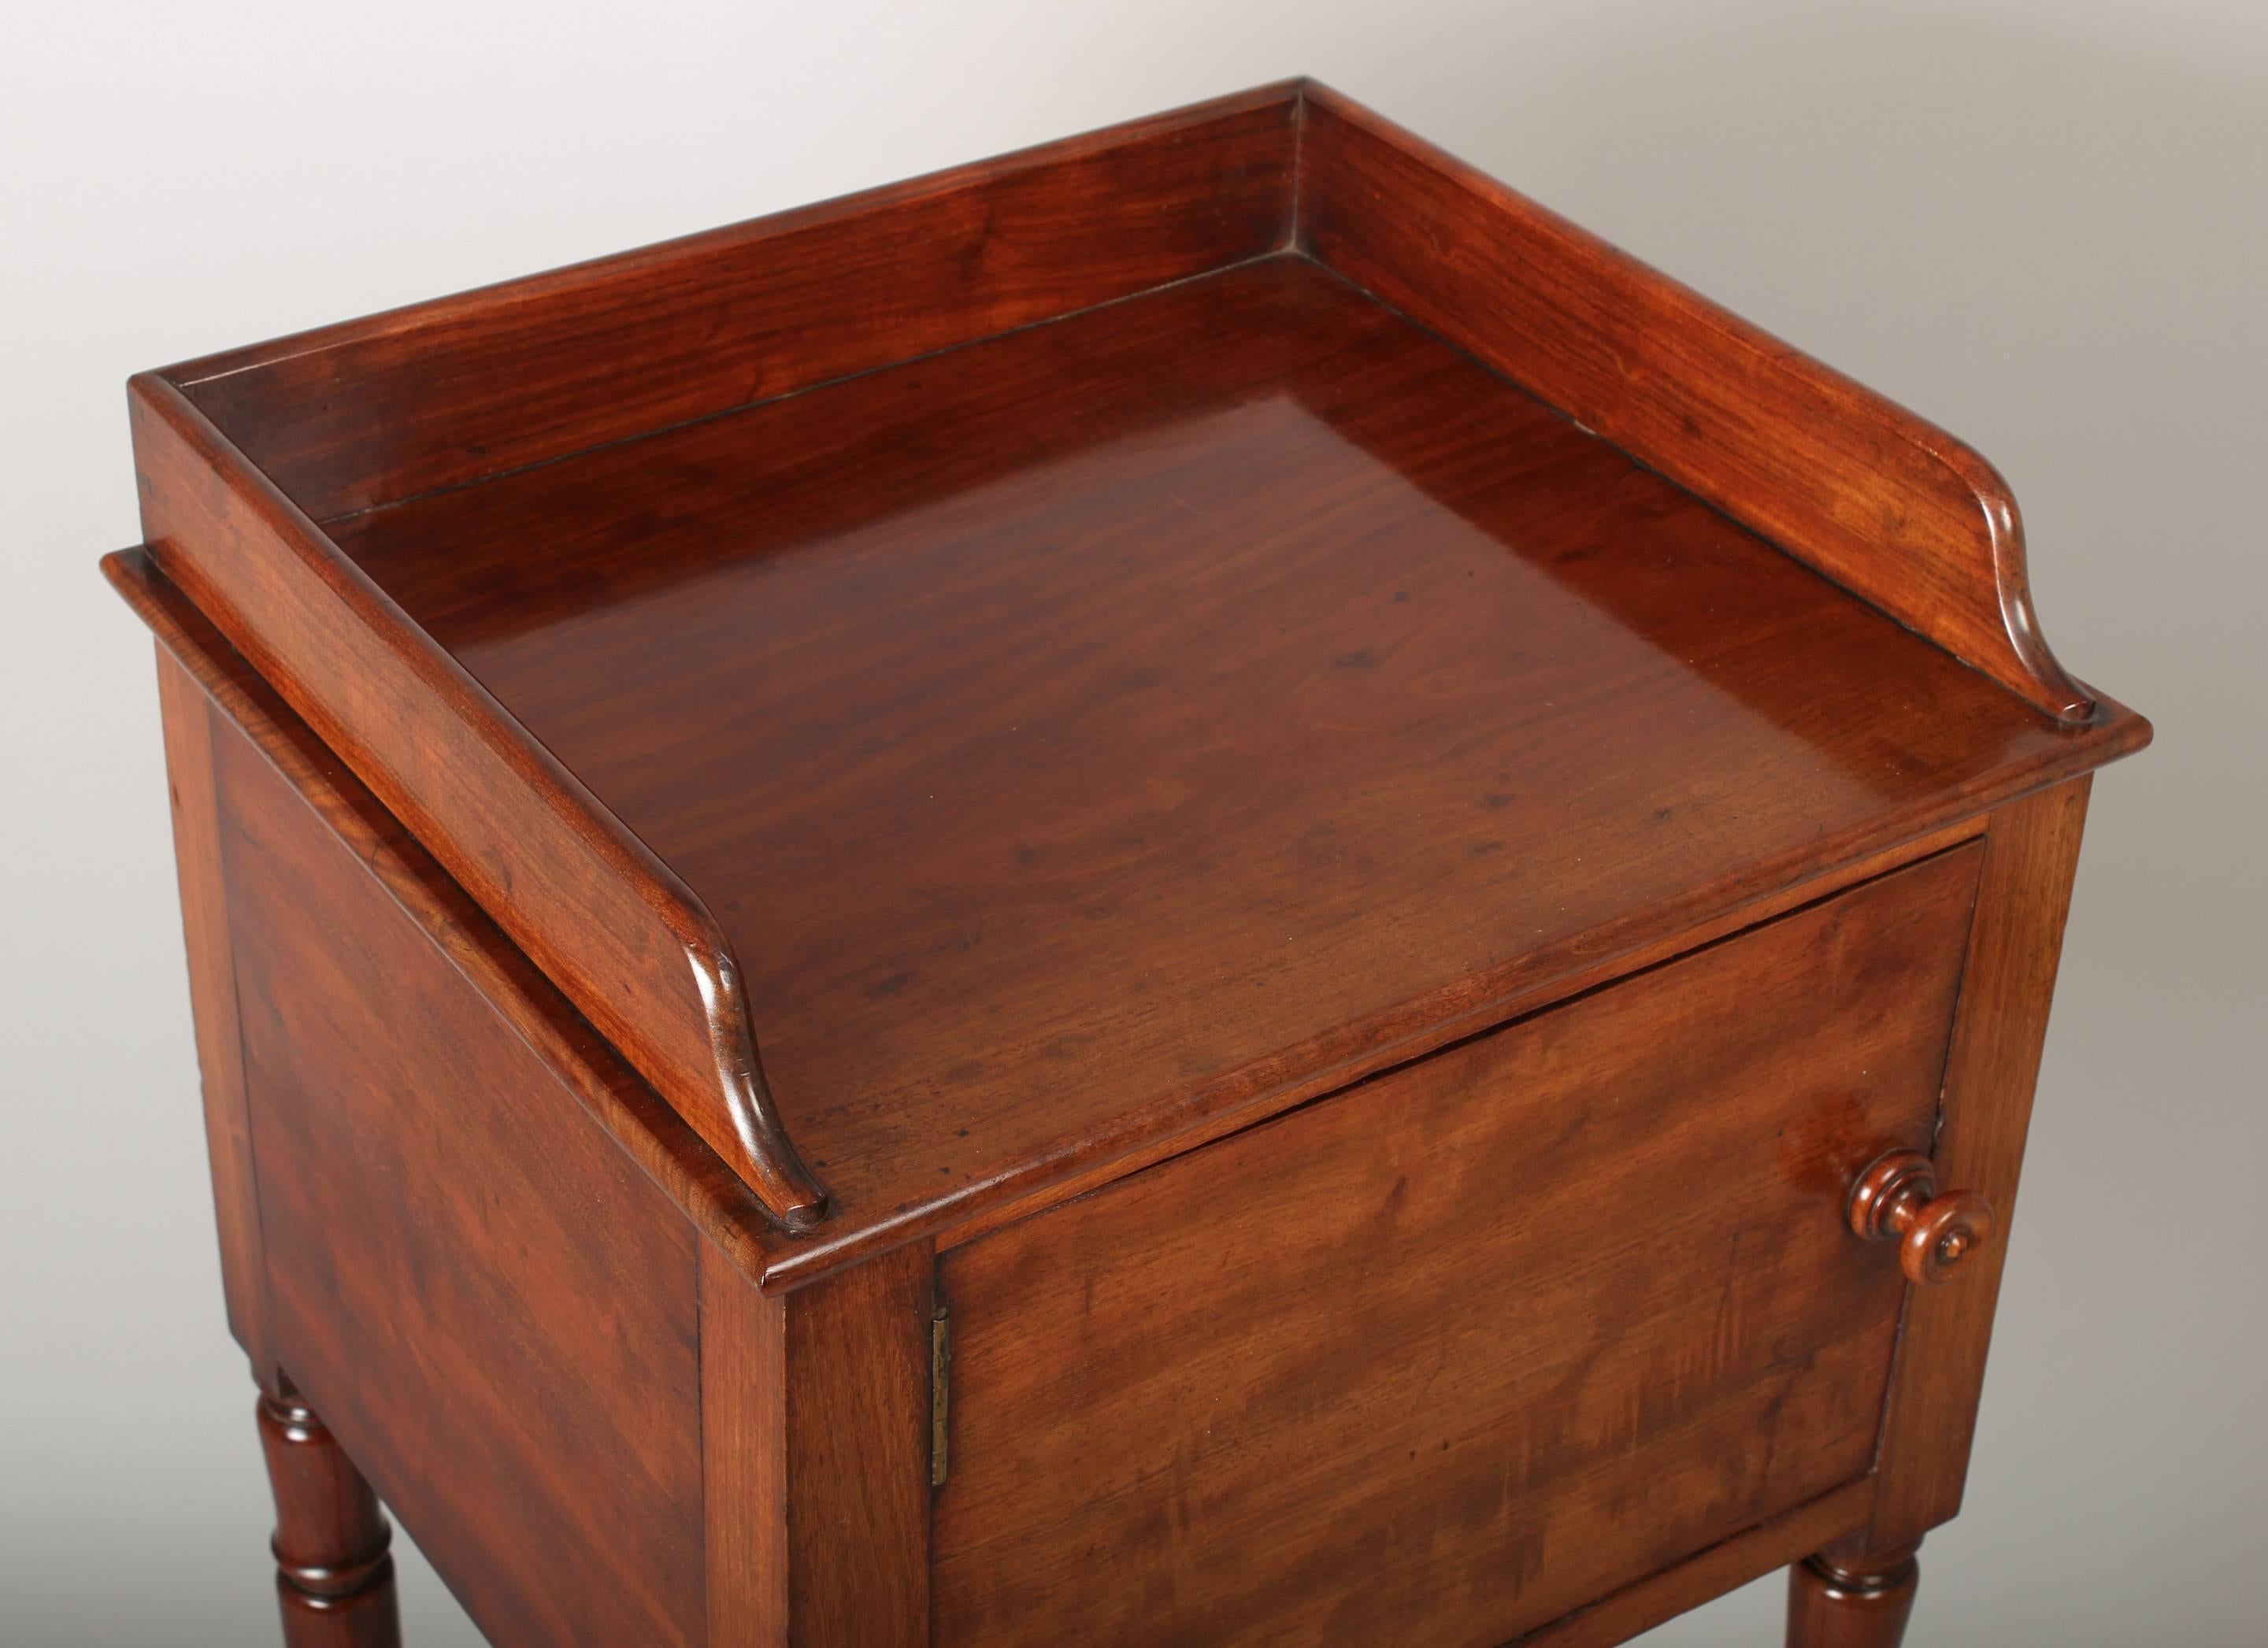 Early 19th century mahogany pot-cupboard with a galleried top and cupboard with a single left-handed door, on turned legs.
 